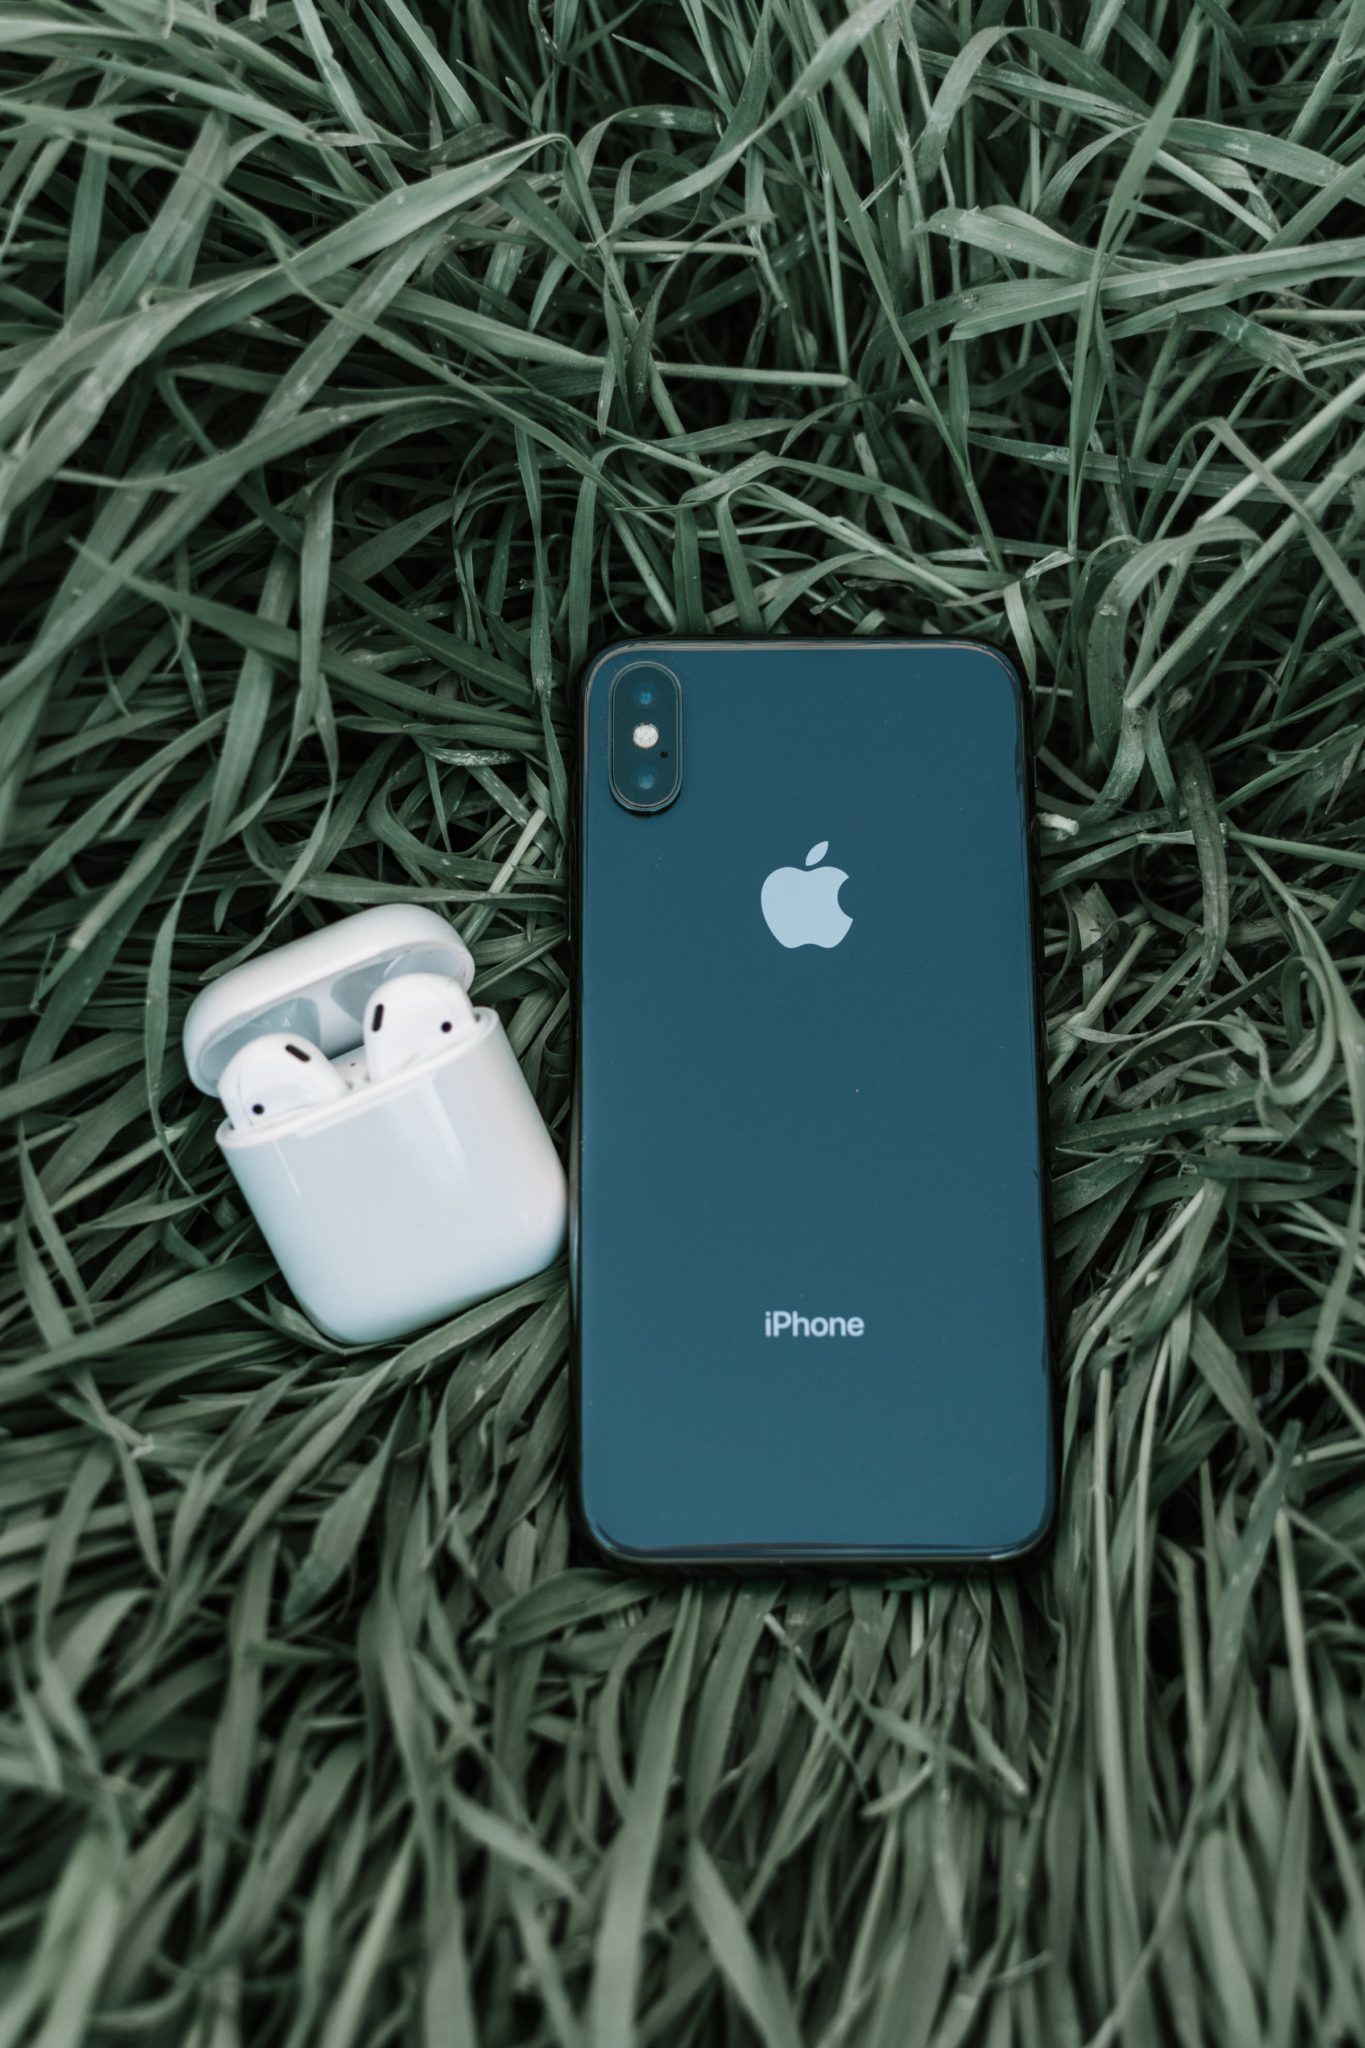 AirPods and iPhone on the grass representing green and circular economy